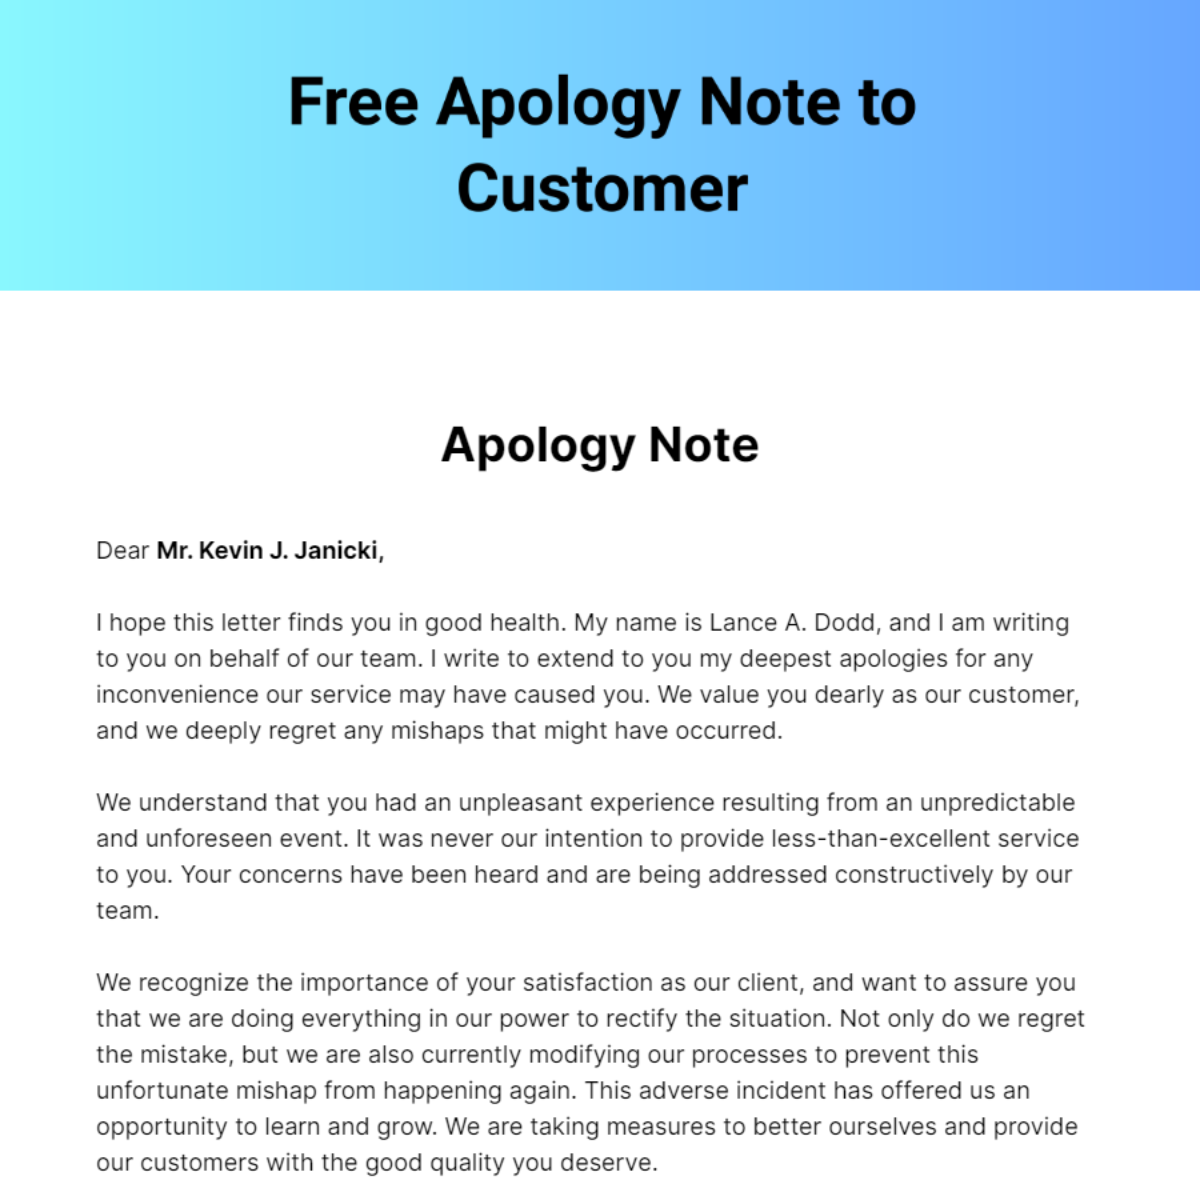 Free Apology Note to Customer Template